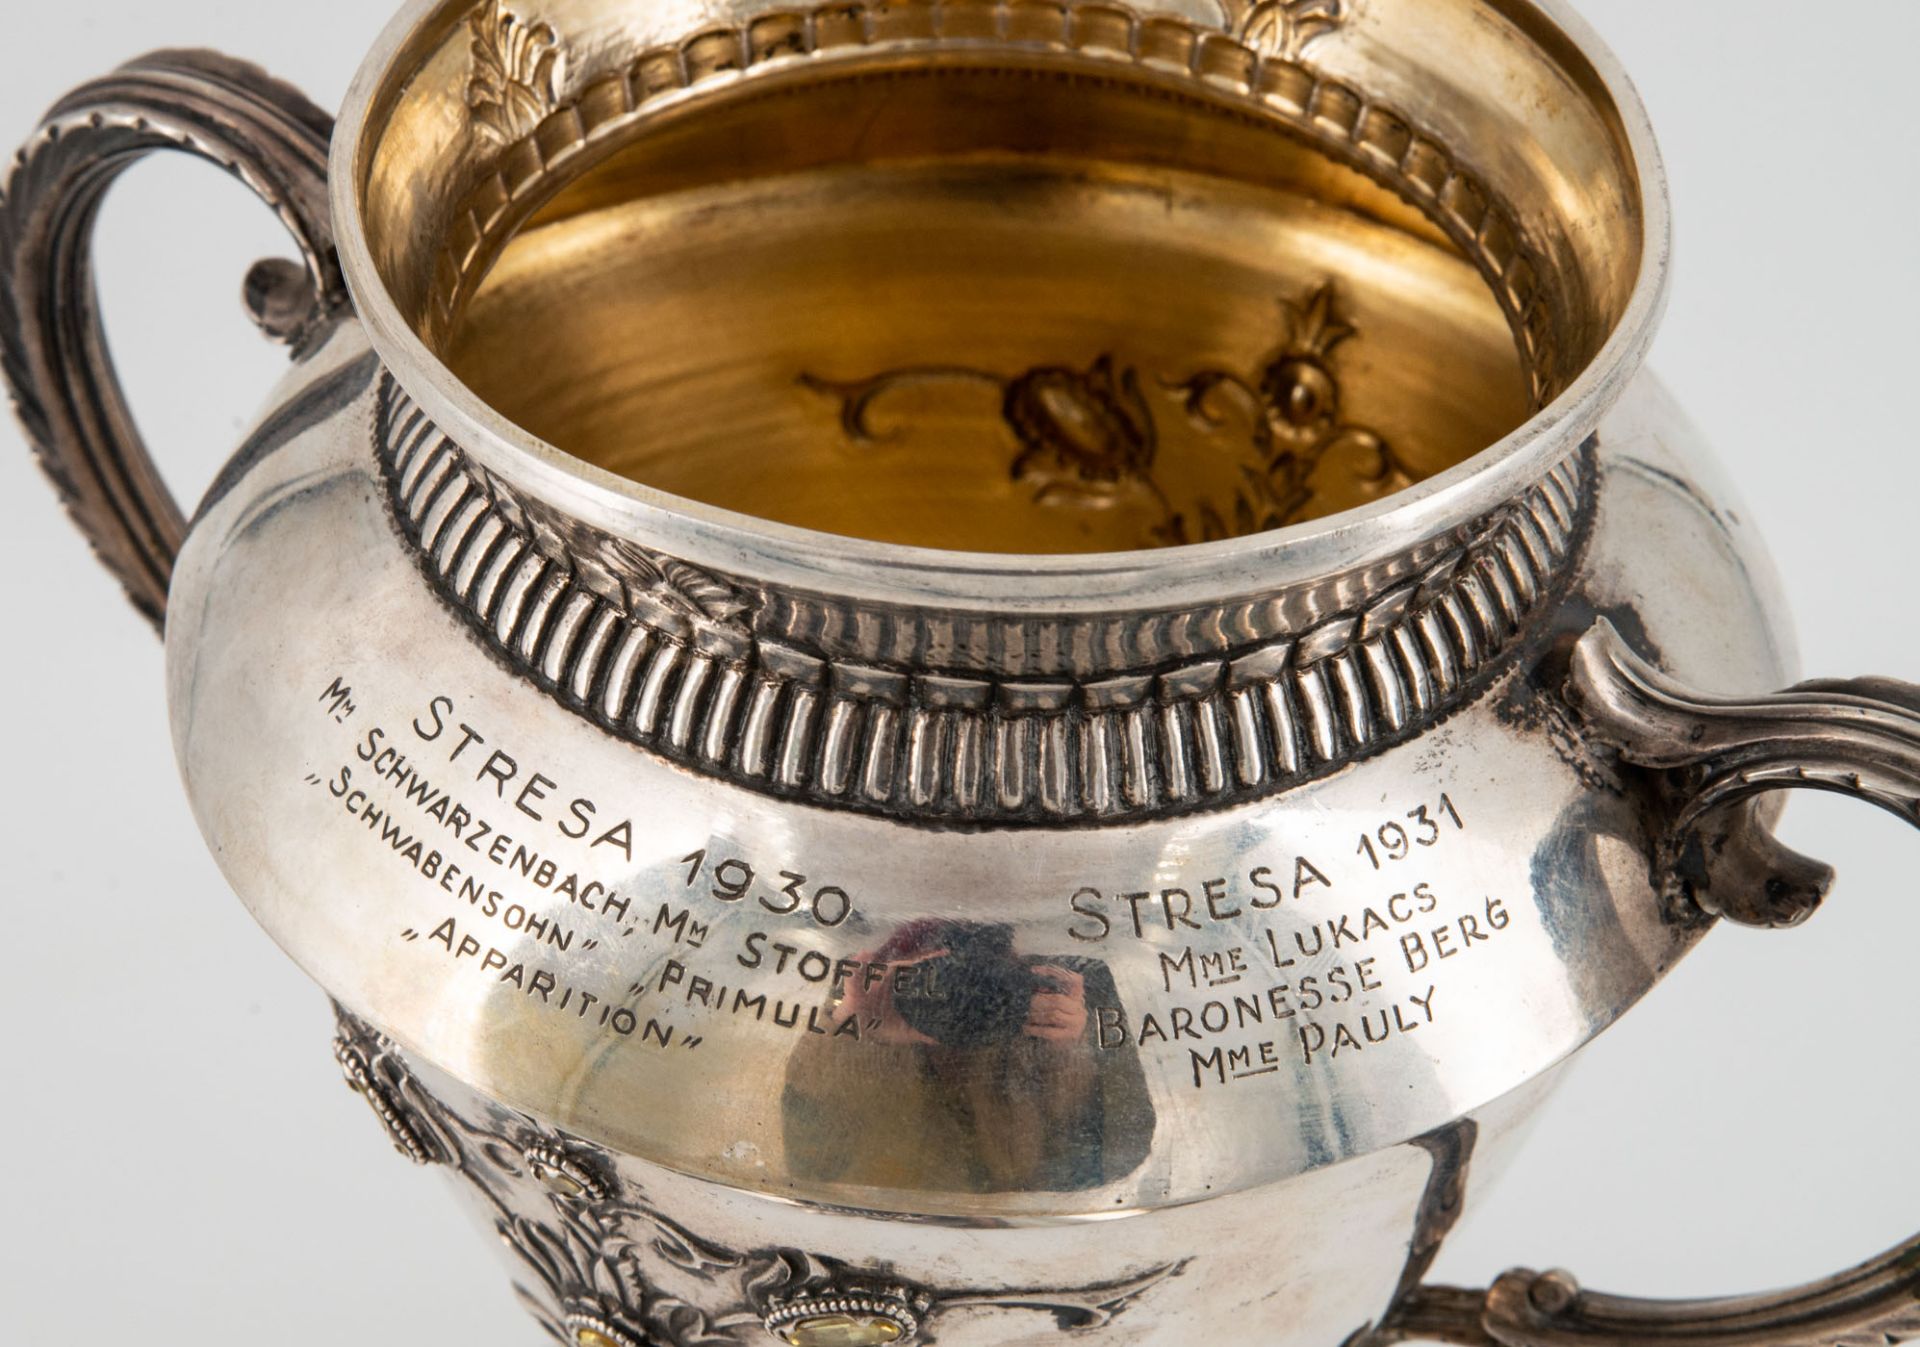 A Fine Silver and Parcel Gilt Presentation Goblet, Austro-Hungary, Early 20th Century - Image 5 of 7